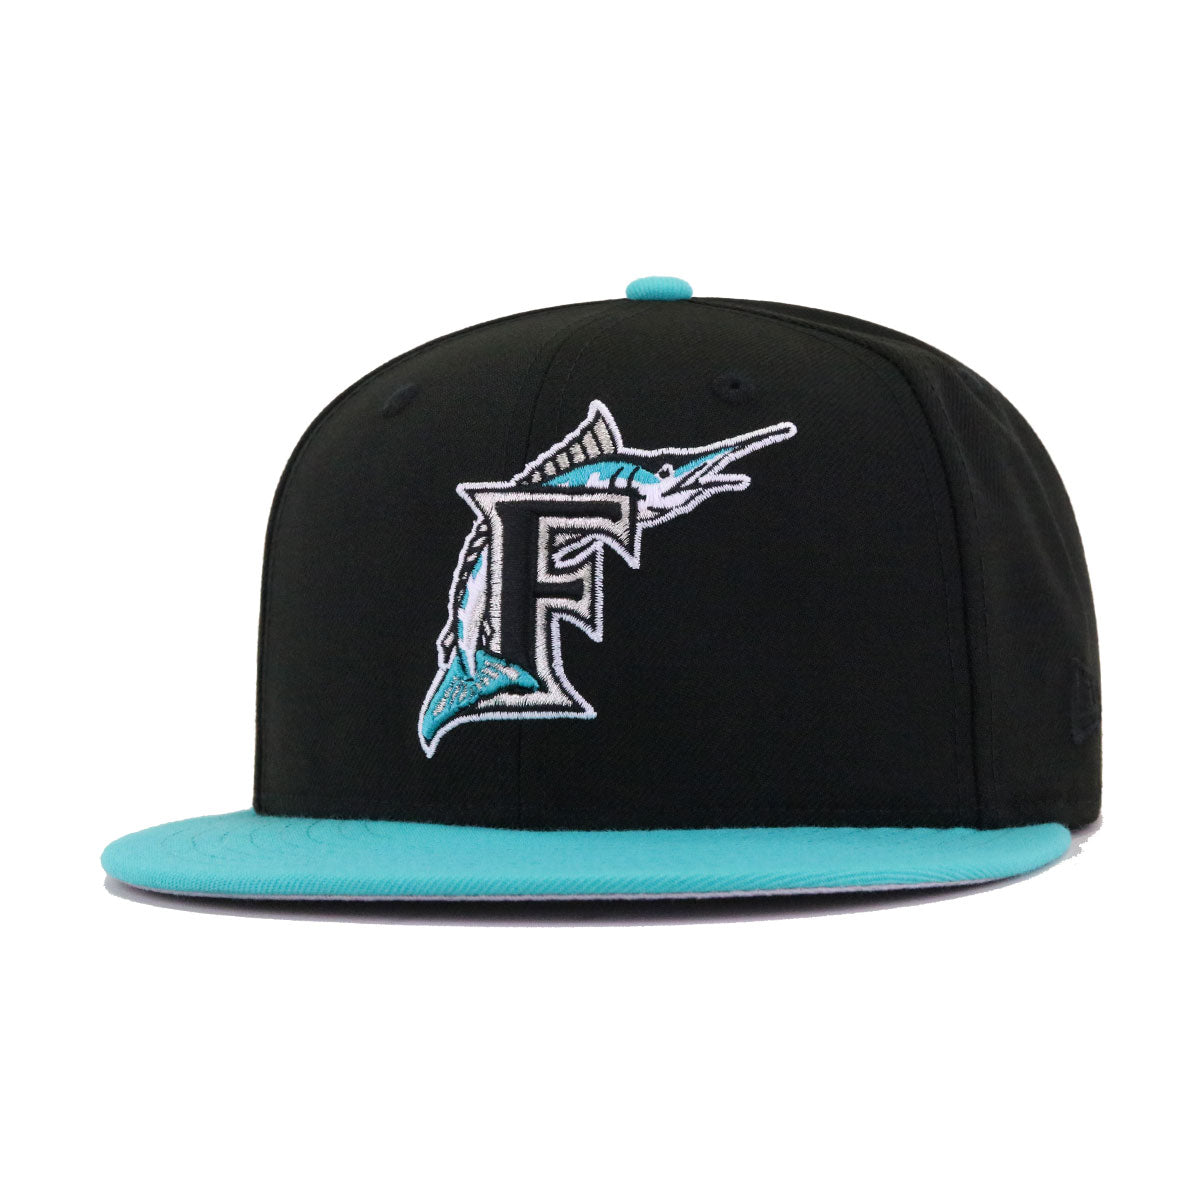 New Era 59FIFTY Florida Marlins 1997 World Series Fitted